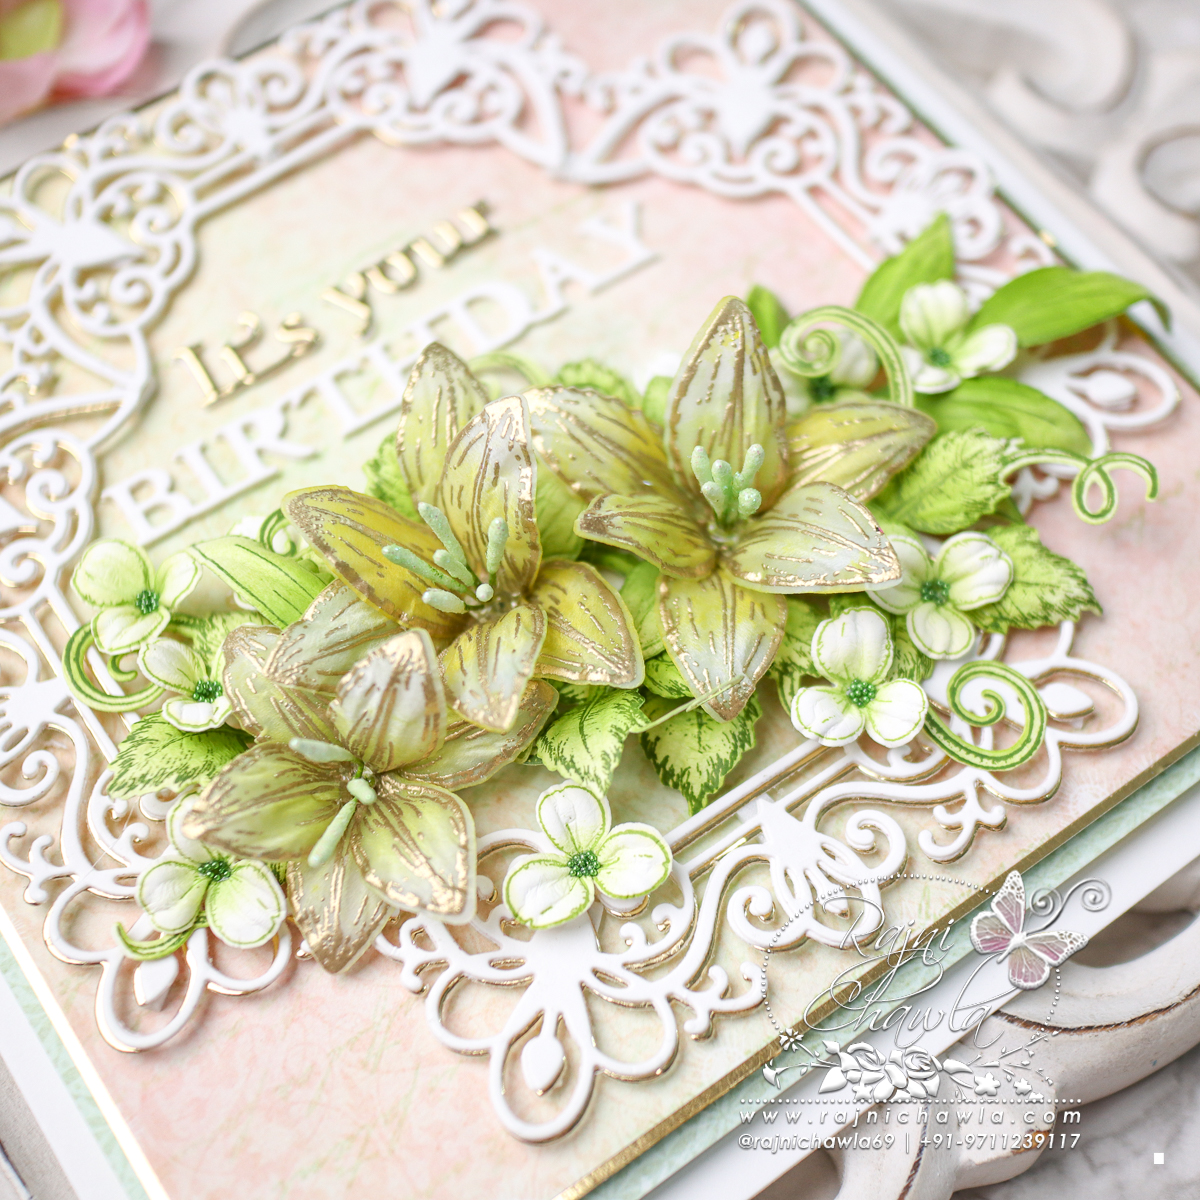 Weekly inspiration with Heartfelt Creations